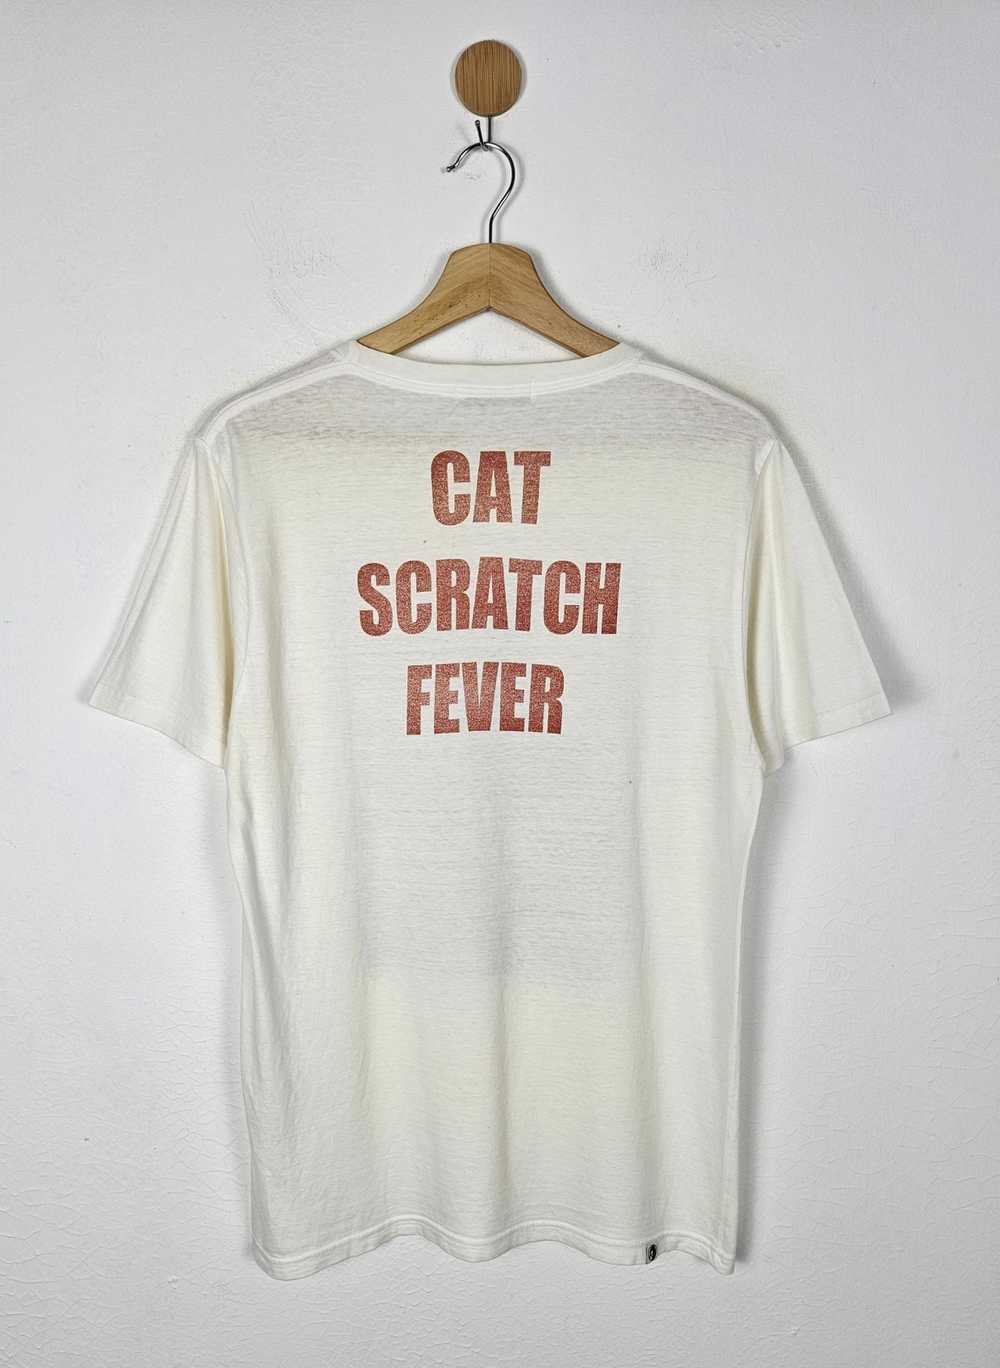 Hysteric Glamour Hysteric Glamour Cat Scratch Fev… - image 2